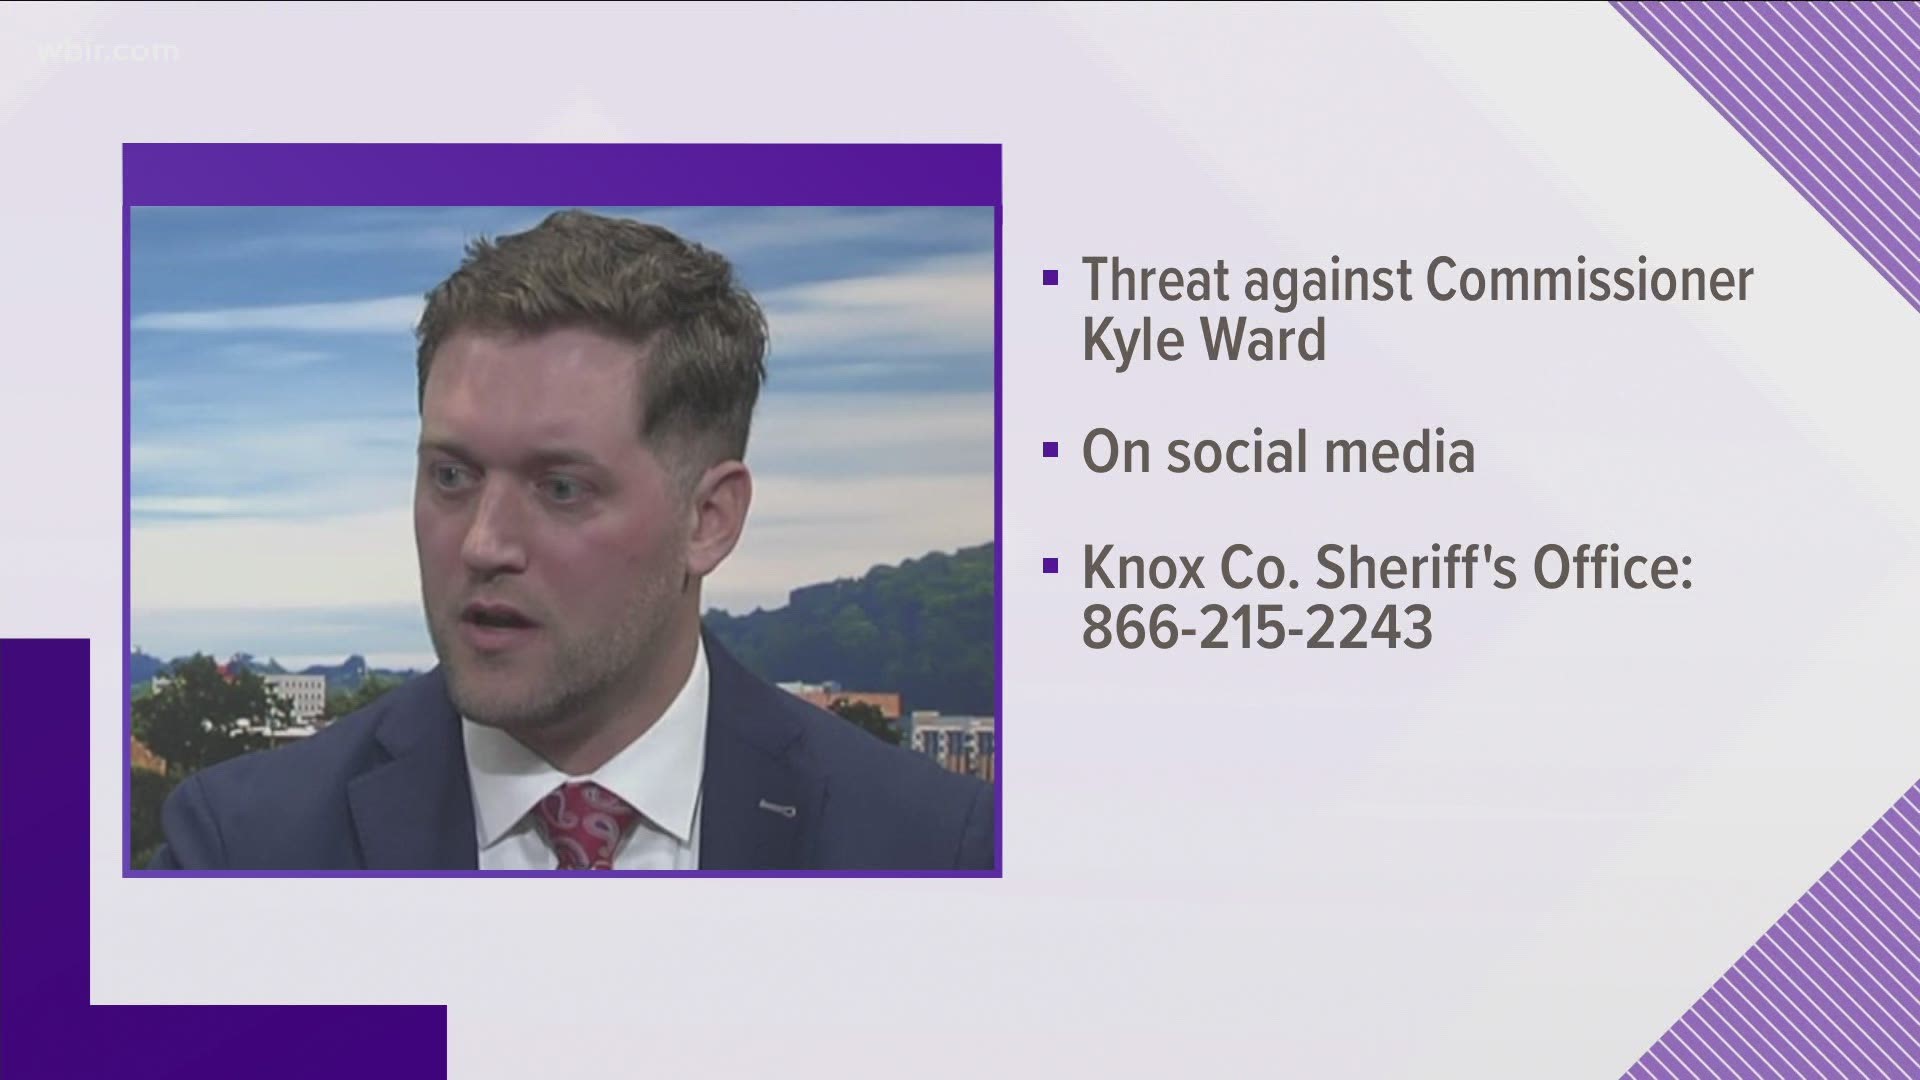 Commissioner Kyle Ward told 10News the social media threats are disappointing but he's faced others like them in recent months.